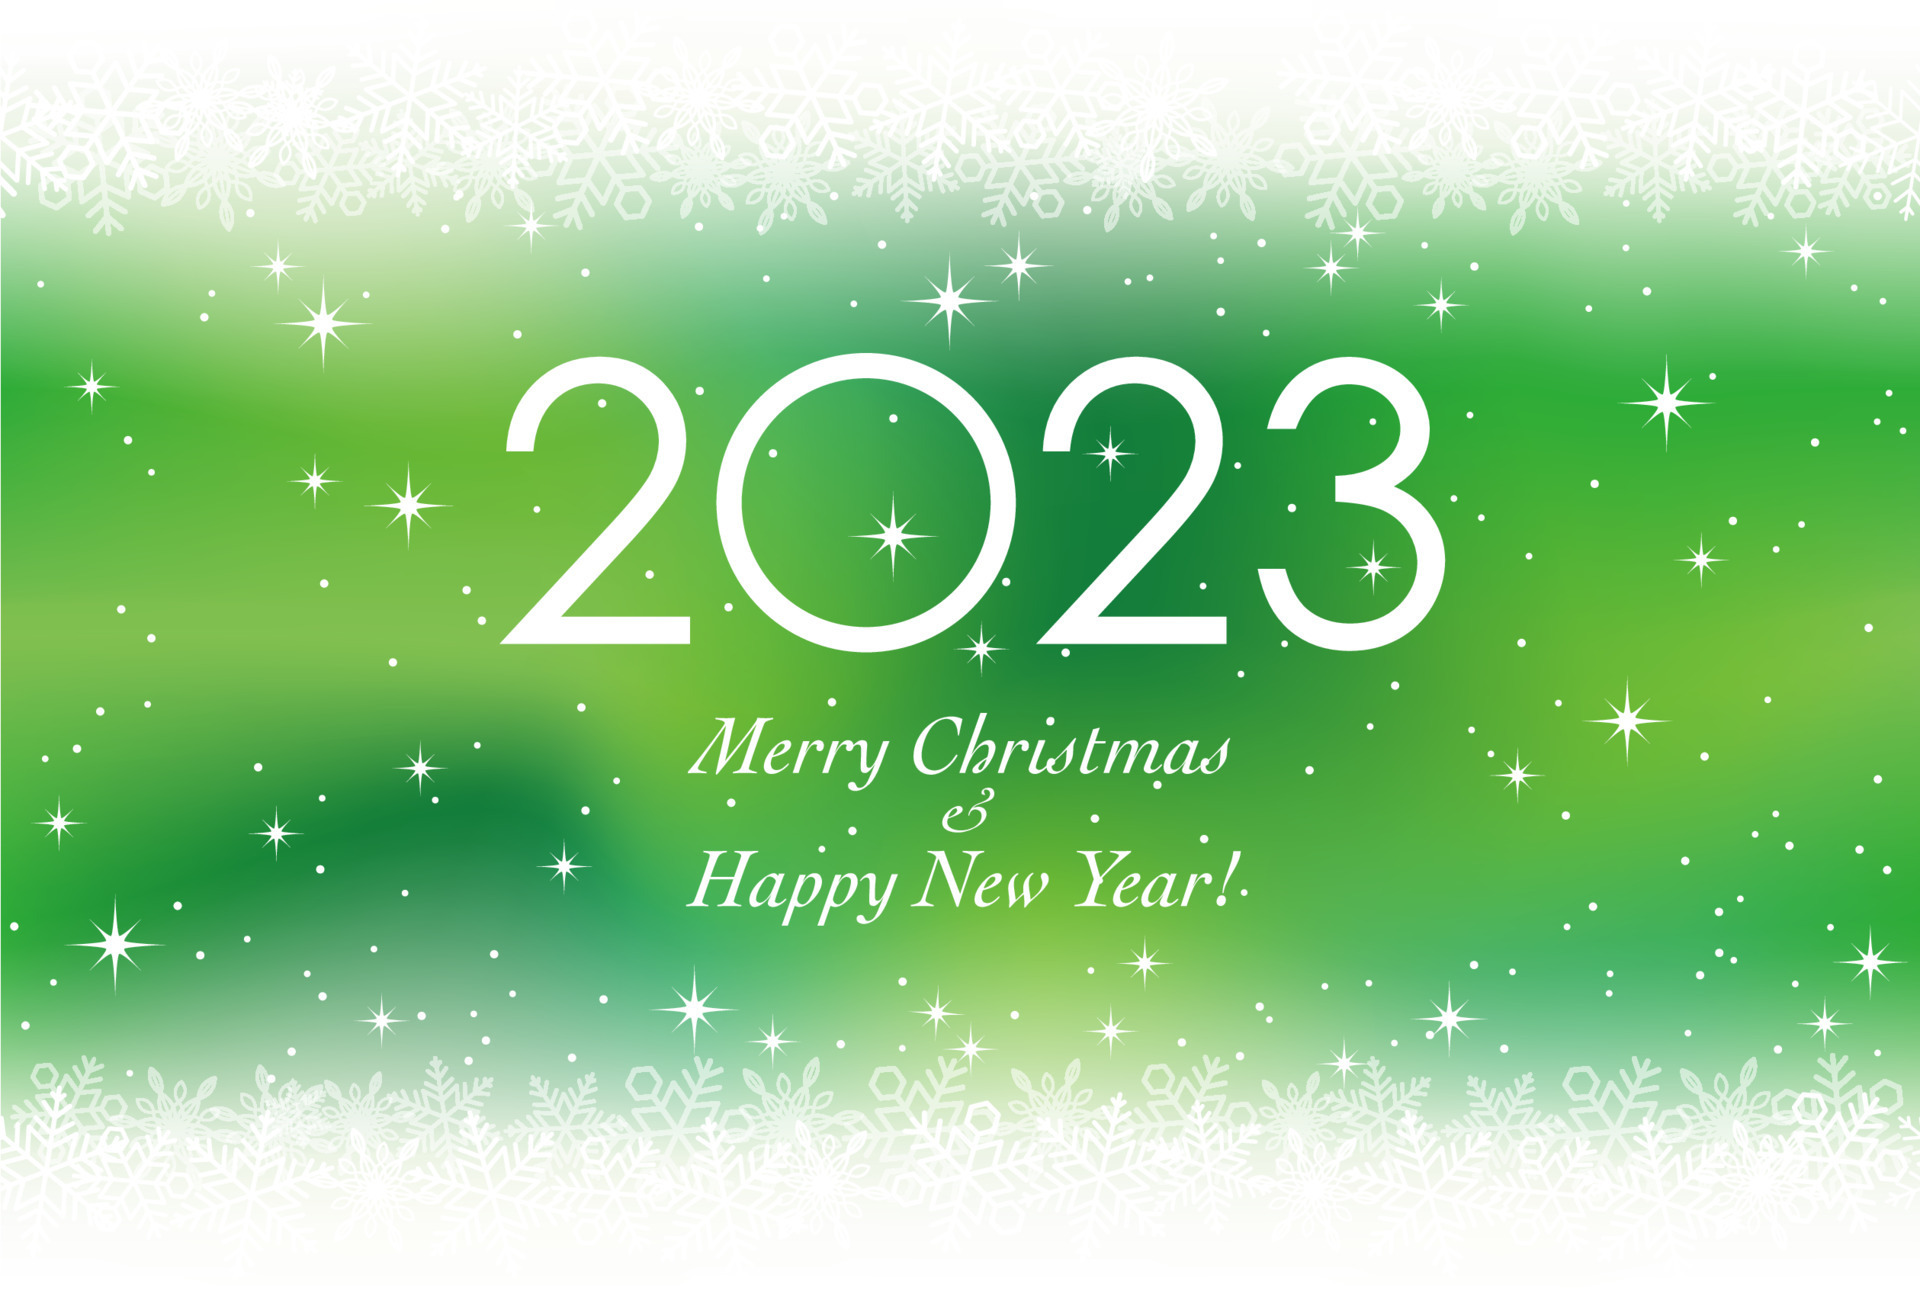 The Year 2023 Christmas And New Years Greeting Card With Snowflakes On A Green  Background. Vector Illustration. 9651486 Vector Art at Vecteezy